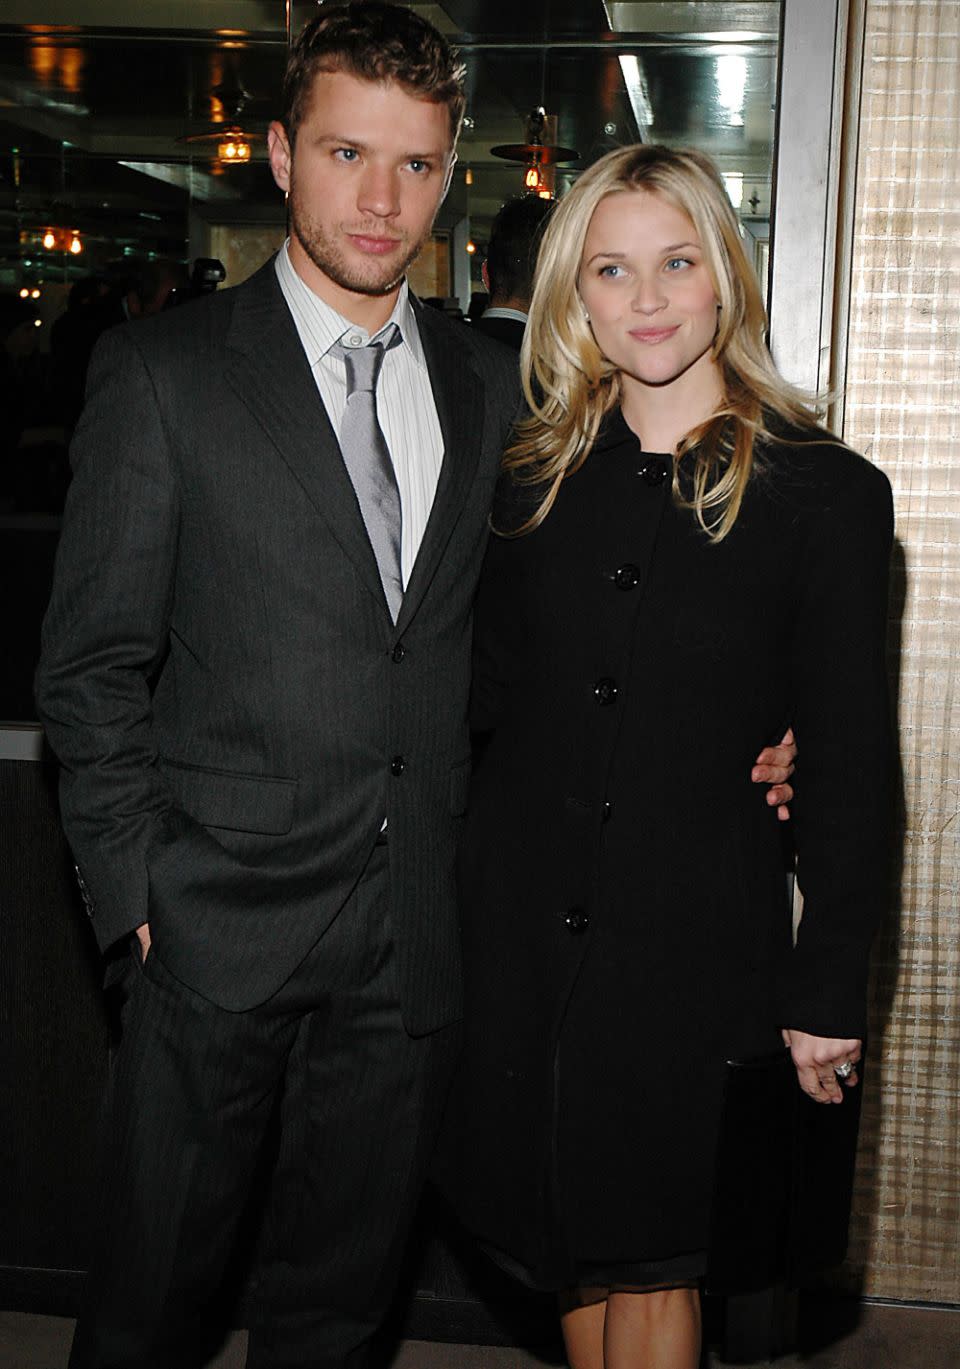 Ryan was previously married to Reese Witherspoon. Source: Getty